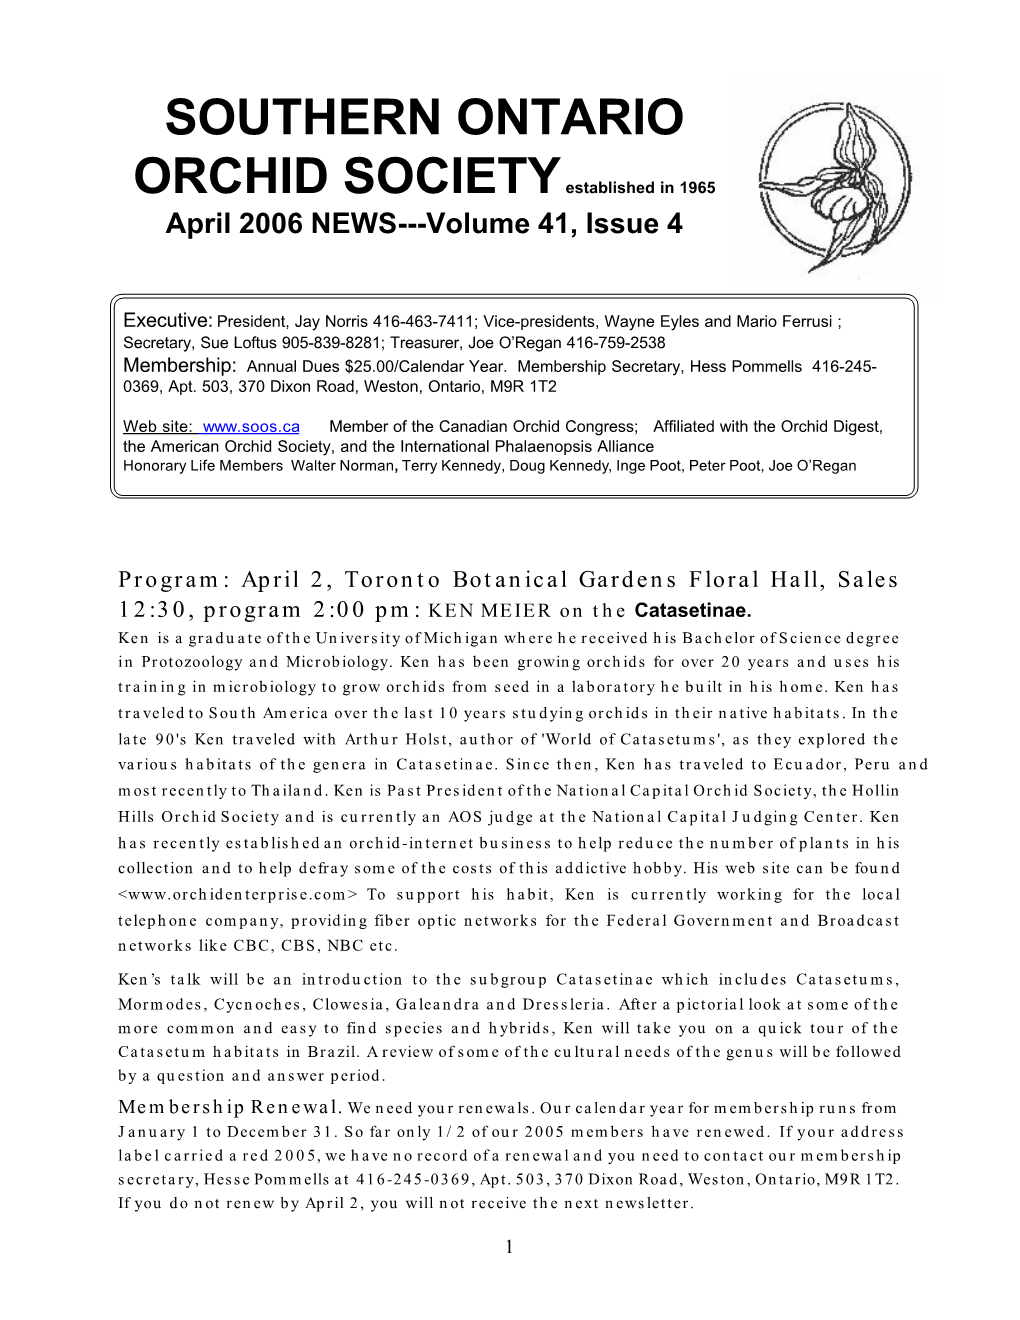 Southern Ontario Orchid Society